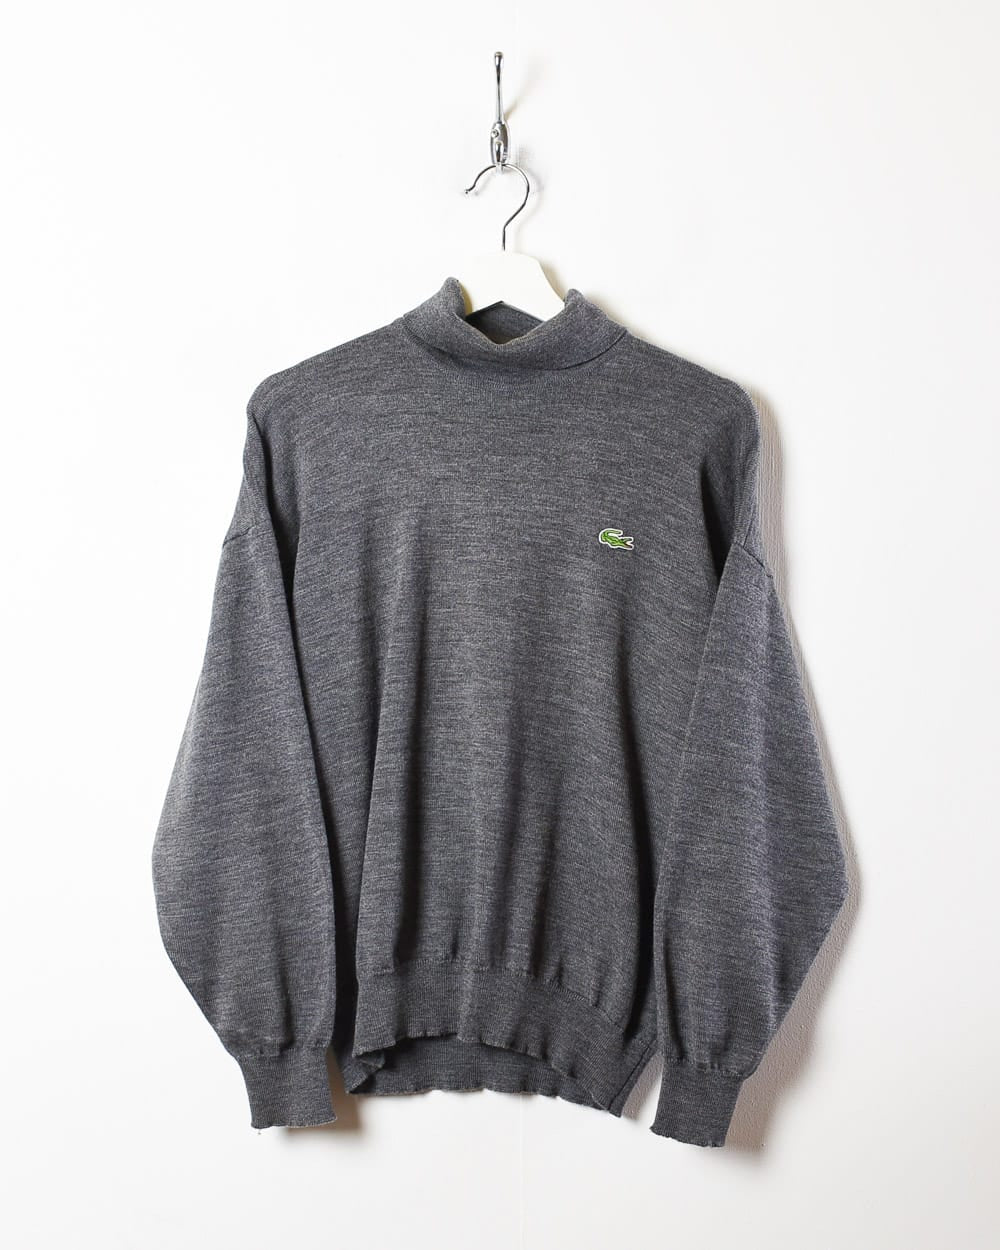 Chemise Lacoste Knitted Turtle Neck Sweatshirt - Small